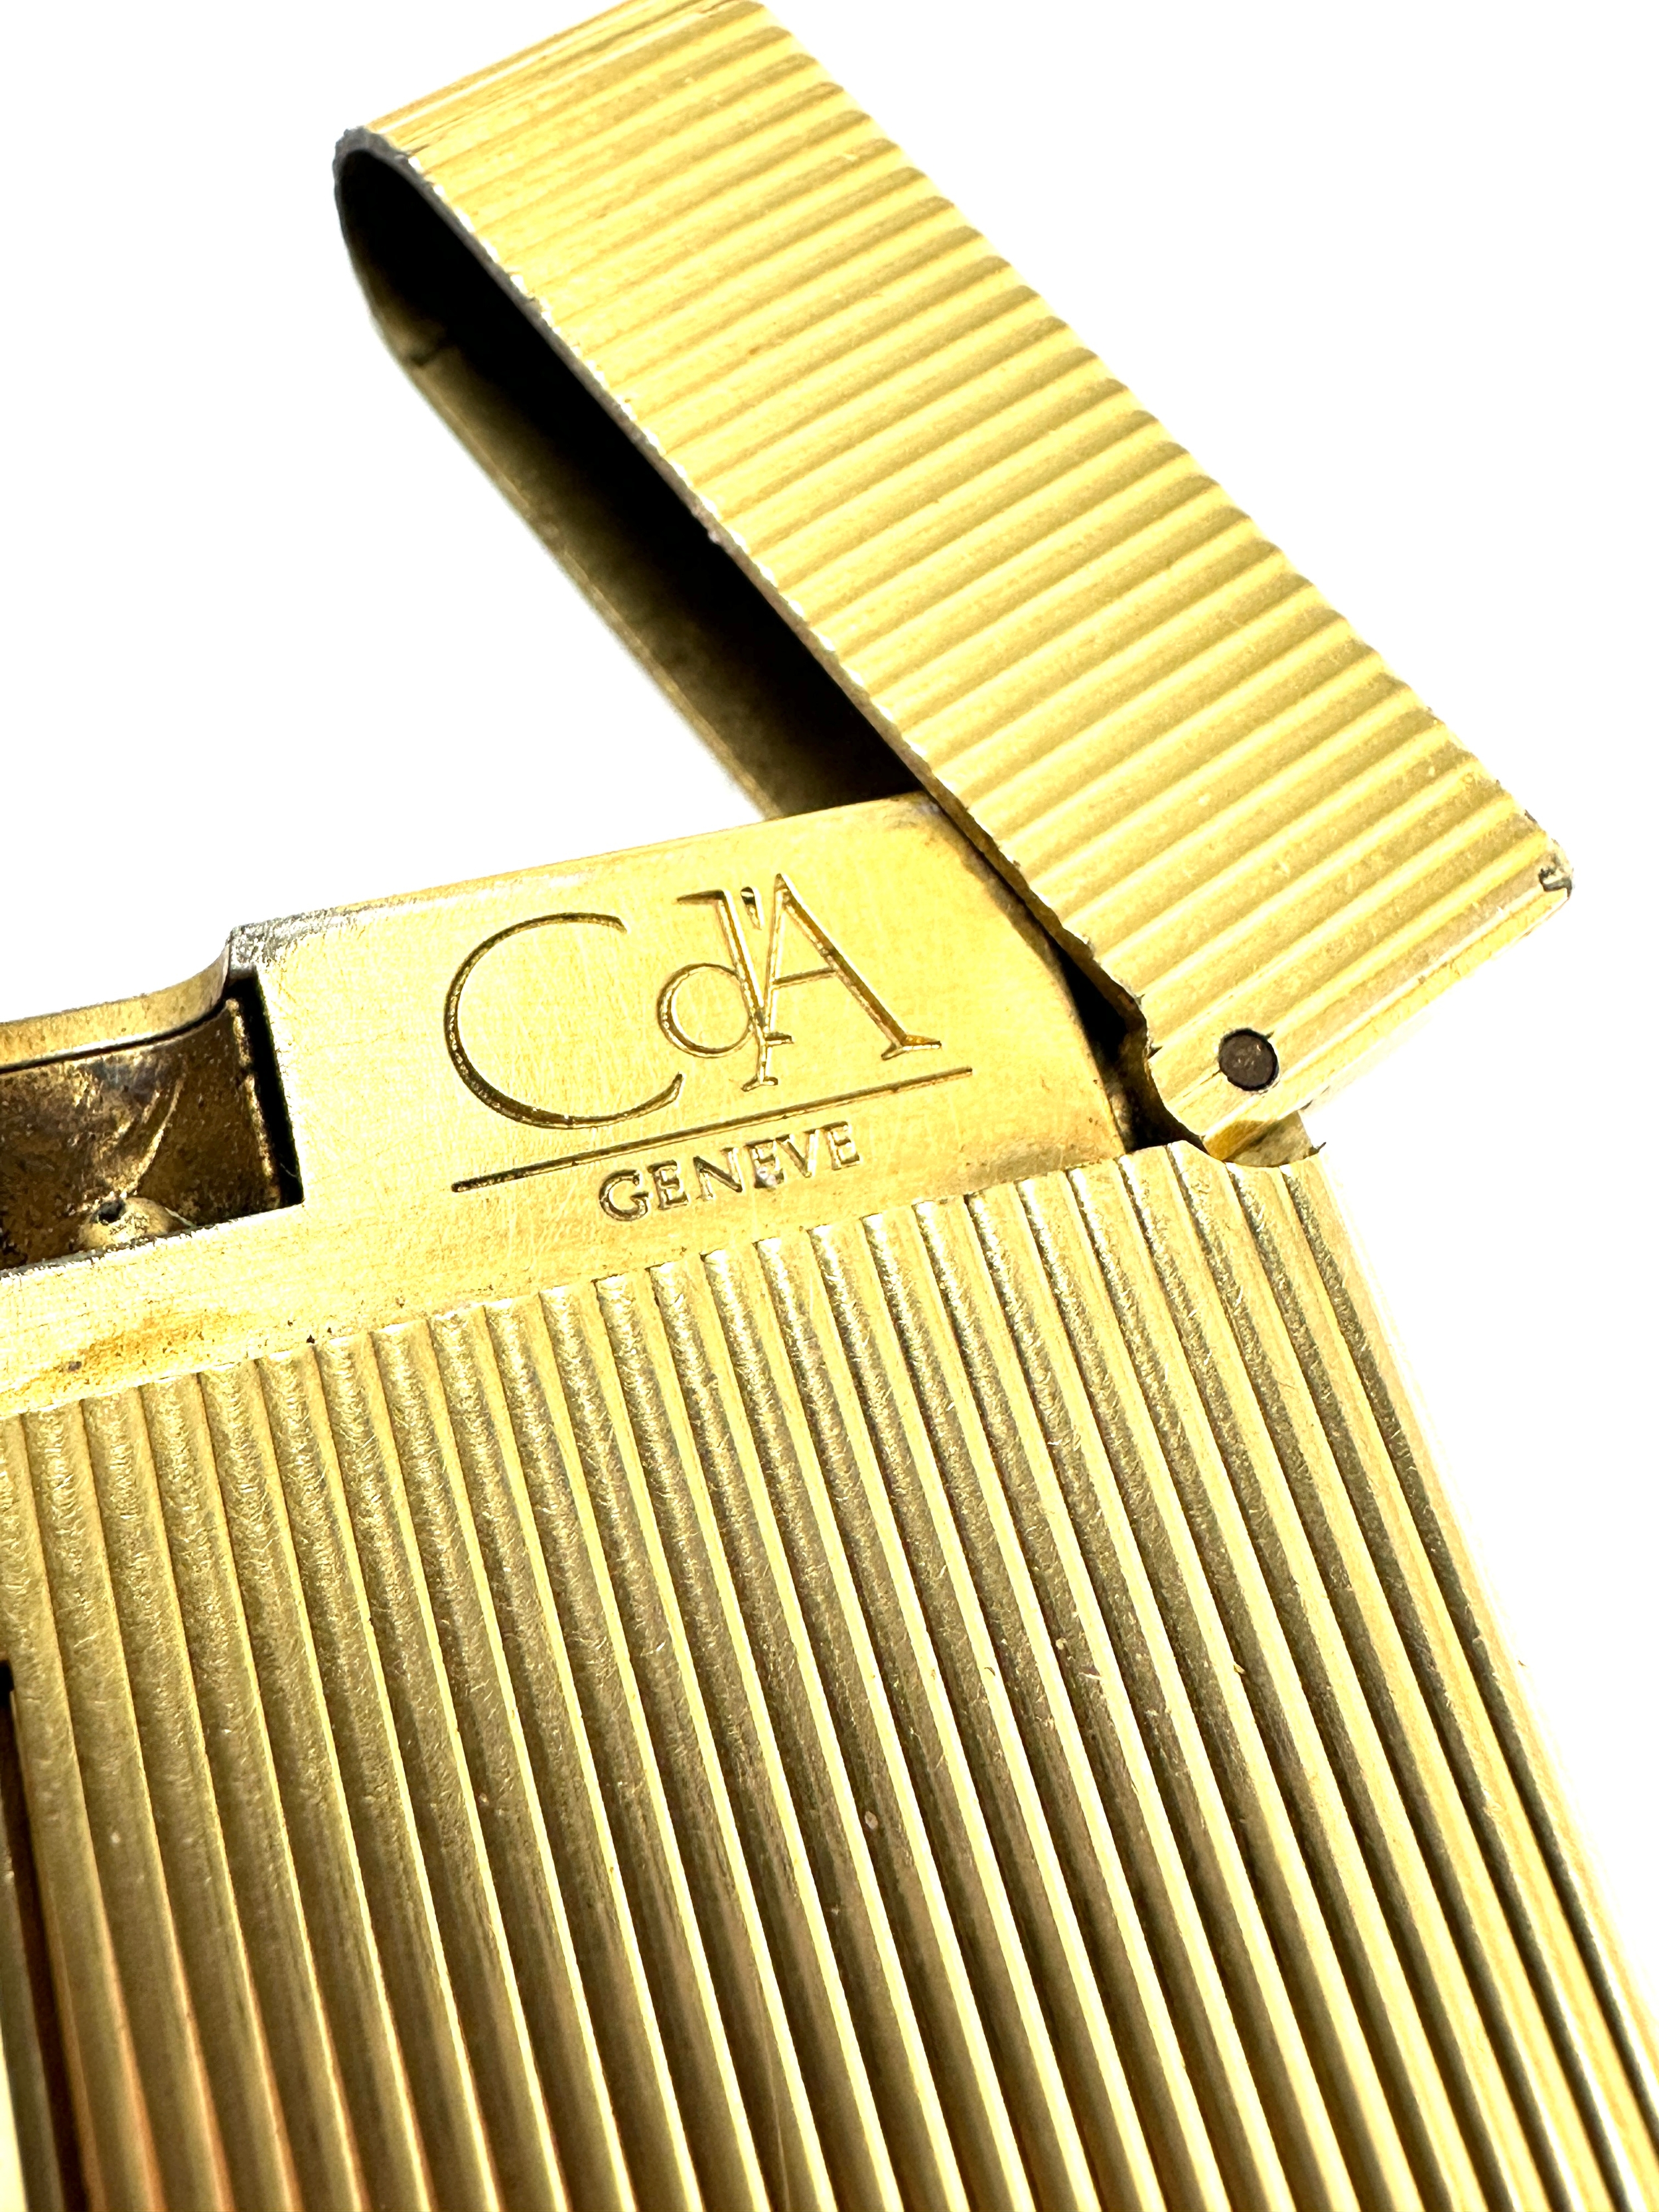 Caran d'Ache cigarette Lighter - Gold Plated - Image 4 of 5